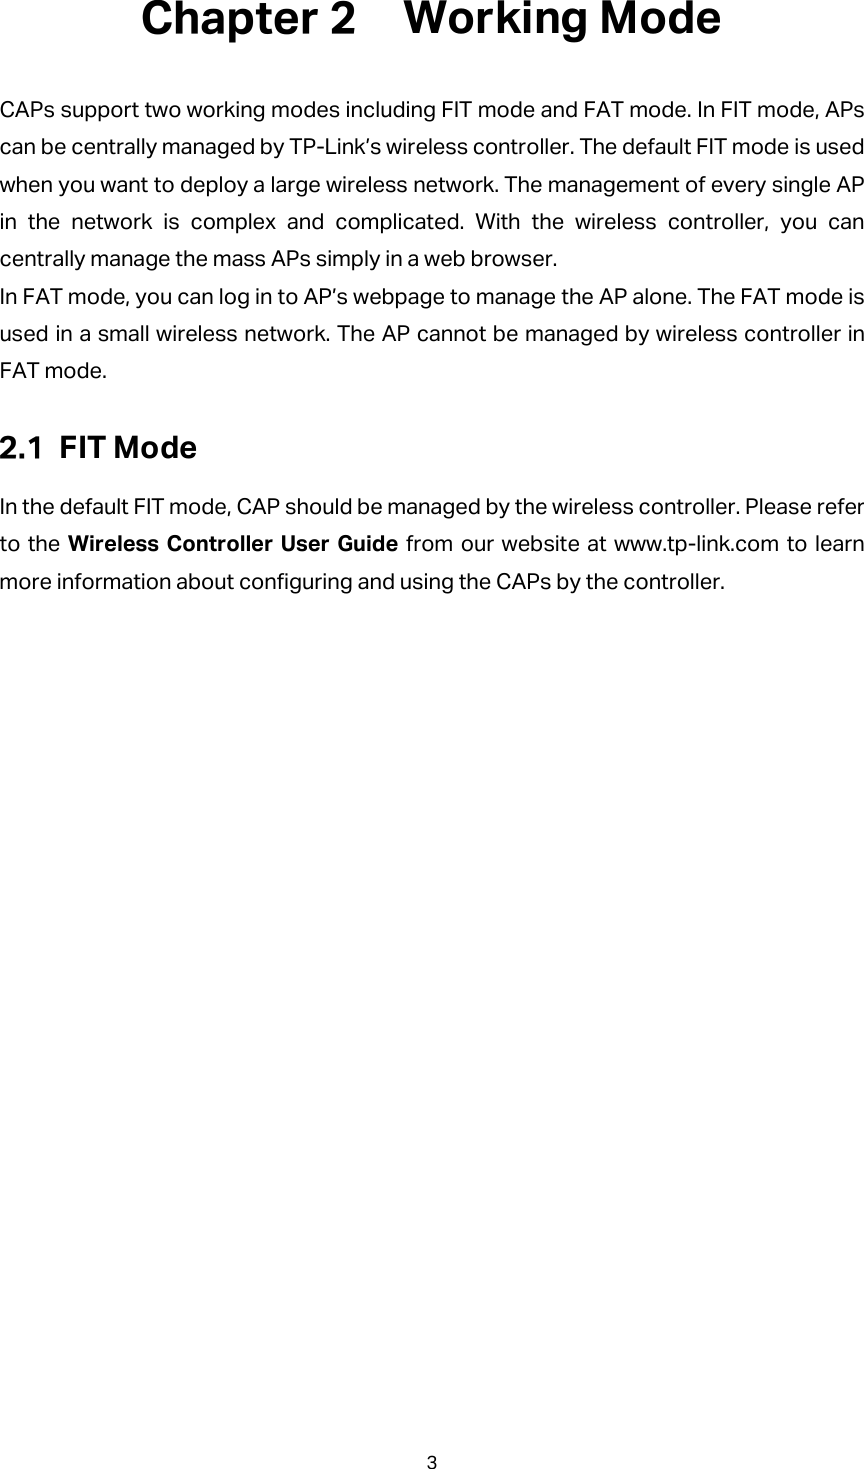  Working Mode CAPs support two working modes including FIT mode and FAT mode. In FIT mode, APs can be centrally managed by TP-Link’s wireless controller. The default FIT mode is used when you want to deploy a large wireless network. The management of every single AP in the network is complex and complicated. With the wireless controller, you can centrally manage the mass APs simply in a web browser. In FAT mode, you can log in to AP’s webpage to manage the AP alone. The FAT mode is used in a small wireless network. The AP cannot be managed by wireless controller in FAT mode.  FIT Mode In the default FIT mode, CAP should be managed by the wireless controller. Please refer to the Wireless Controller User Guide from our website at www.tp-link.com to learn more information about configuring and using the CAPs by the controller. 3 